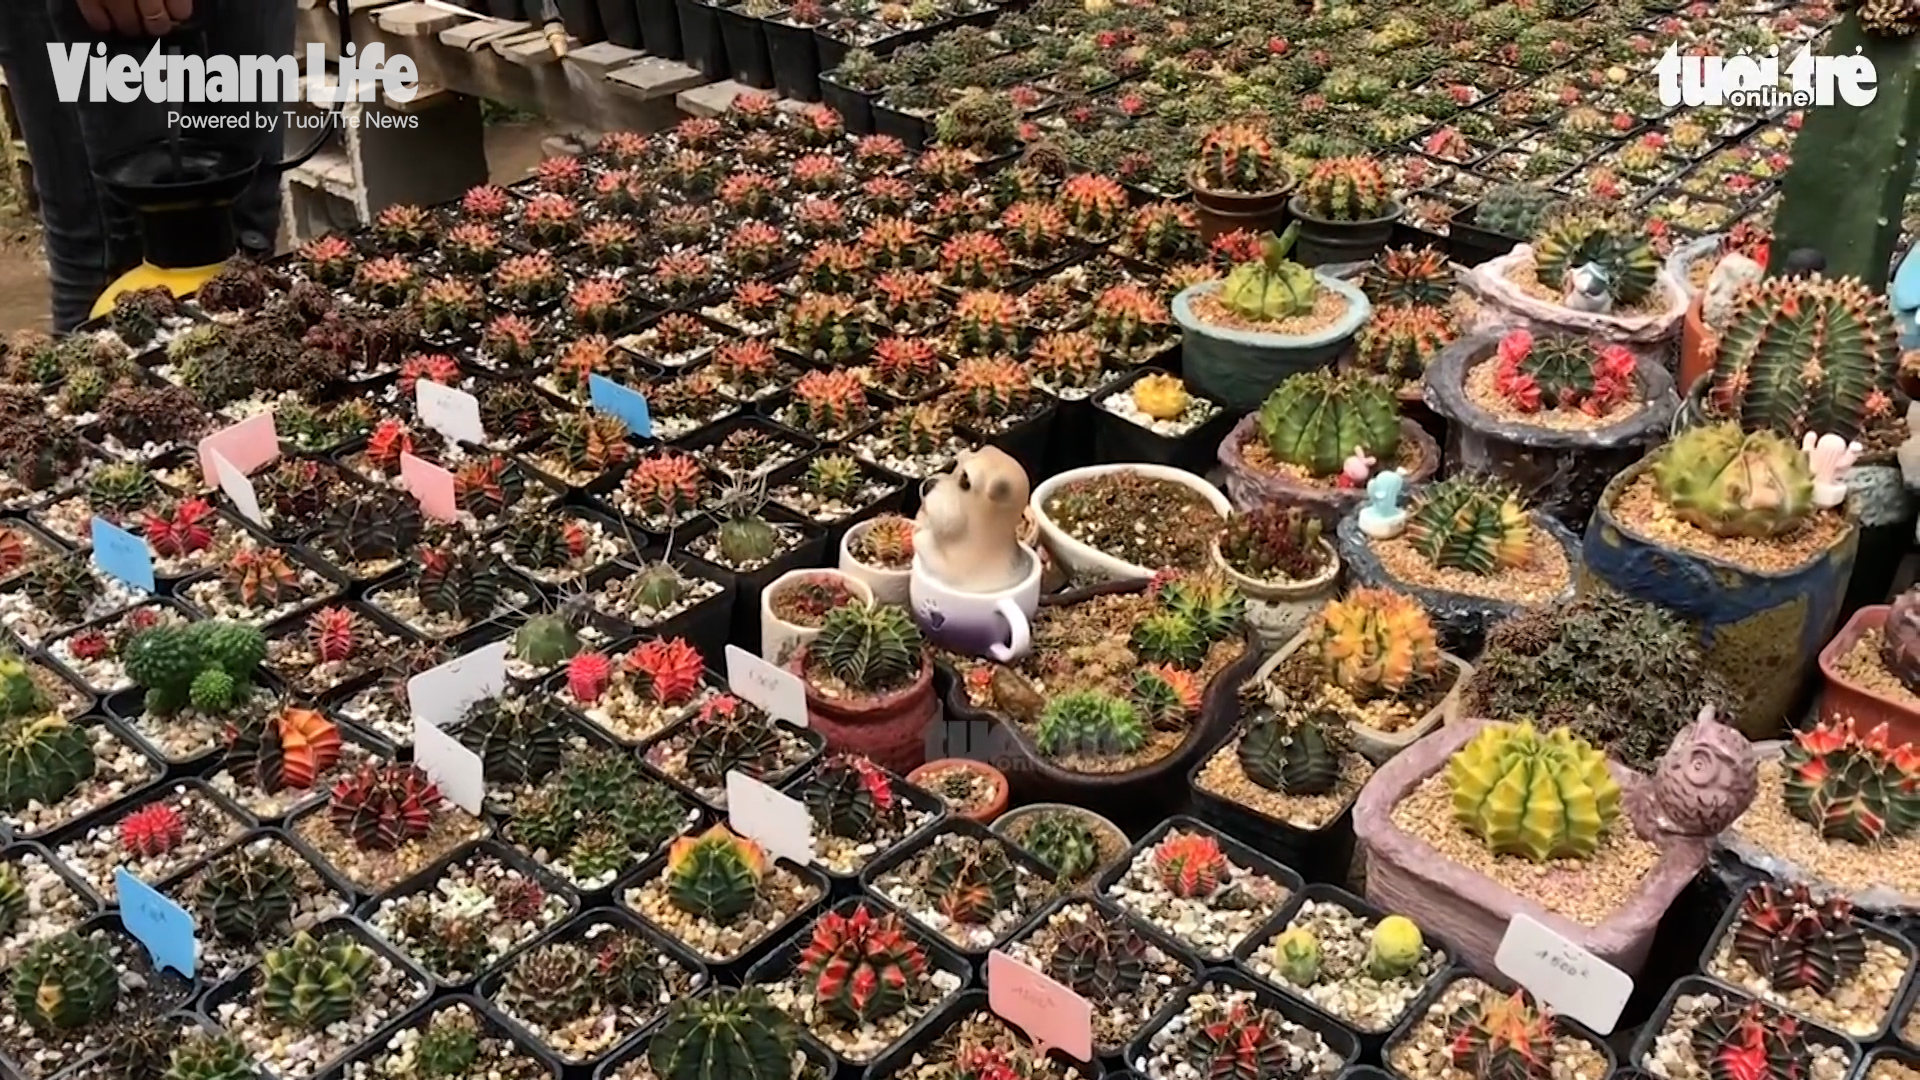 Check out this garden with 50,000 succulents in Vietnam